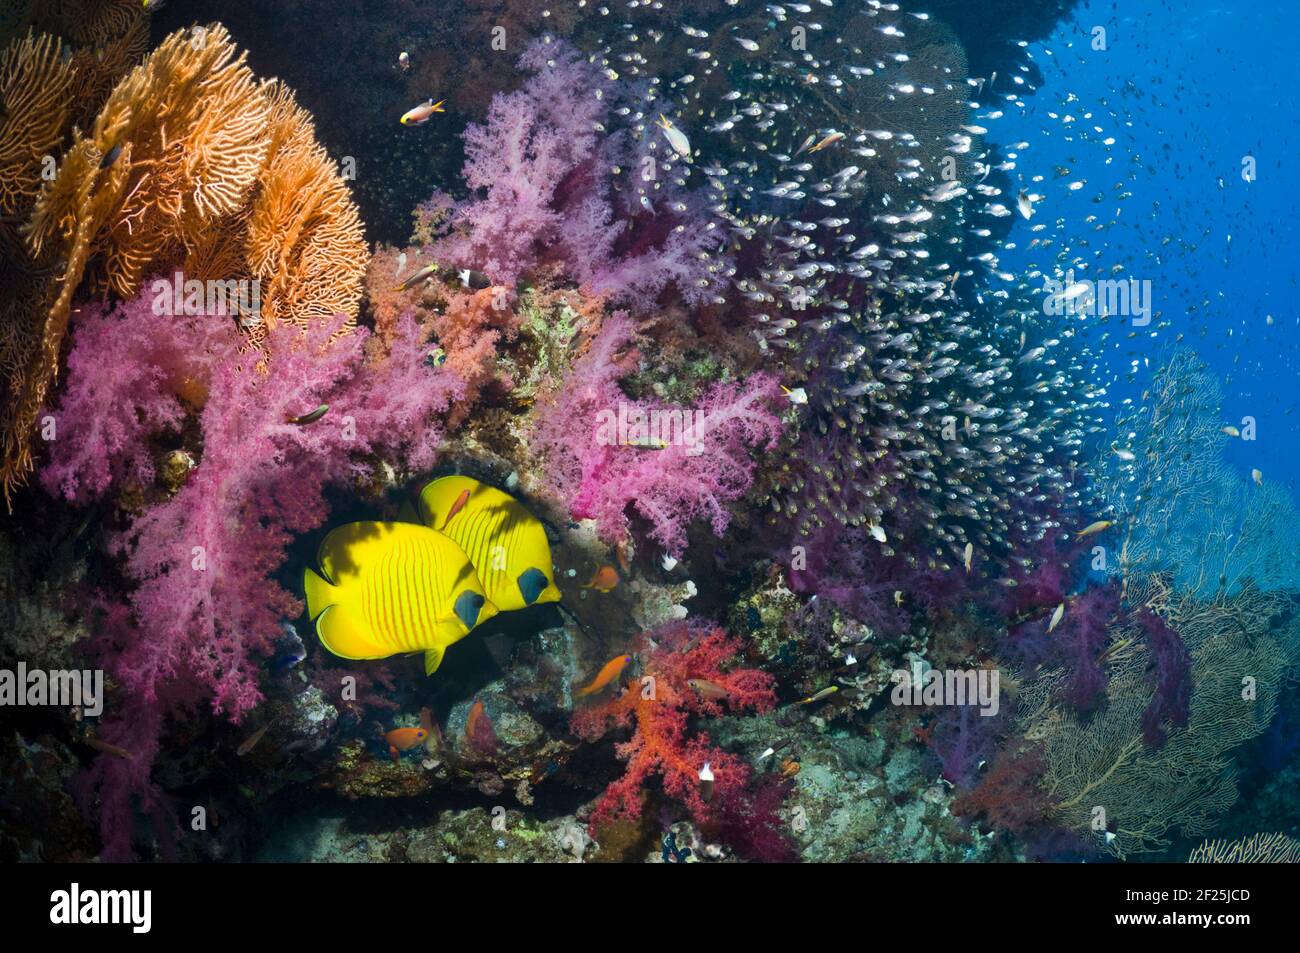 Pair of Golden butterflyfish(Chaetodon semilarvatus) on coral reef with soft corals (Dendronephthya sp) and a school of Pygmy sweepers Parapriacanthus Stock Photo